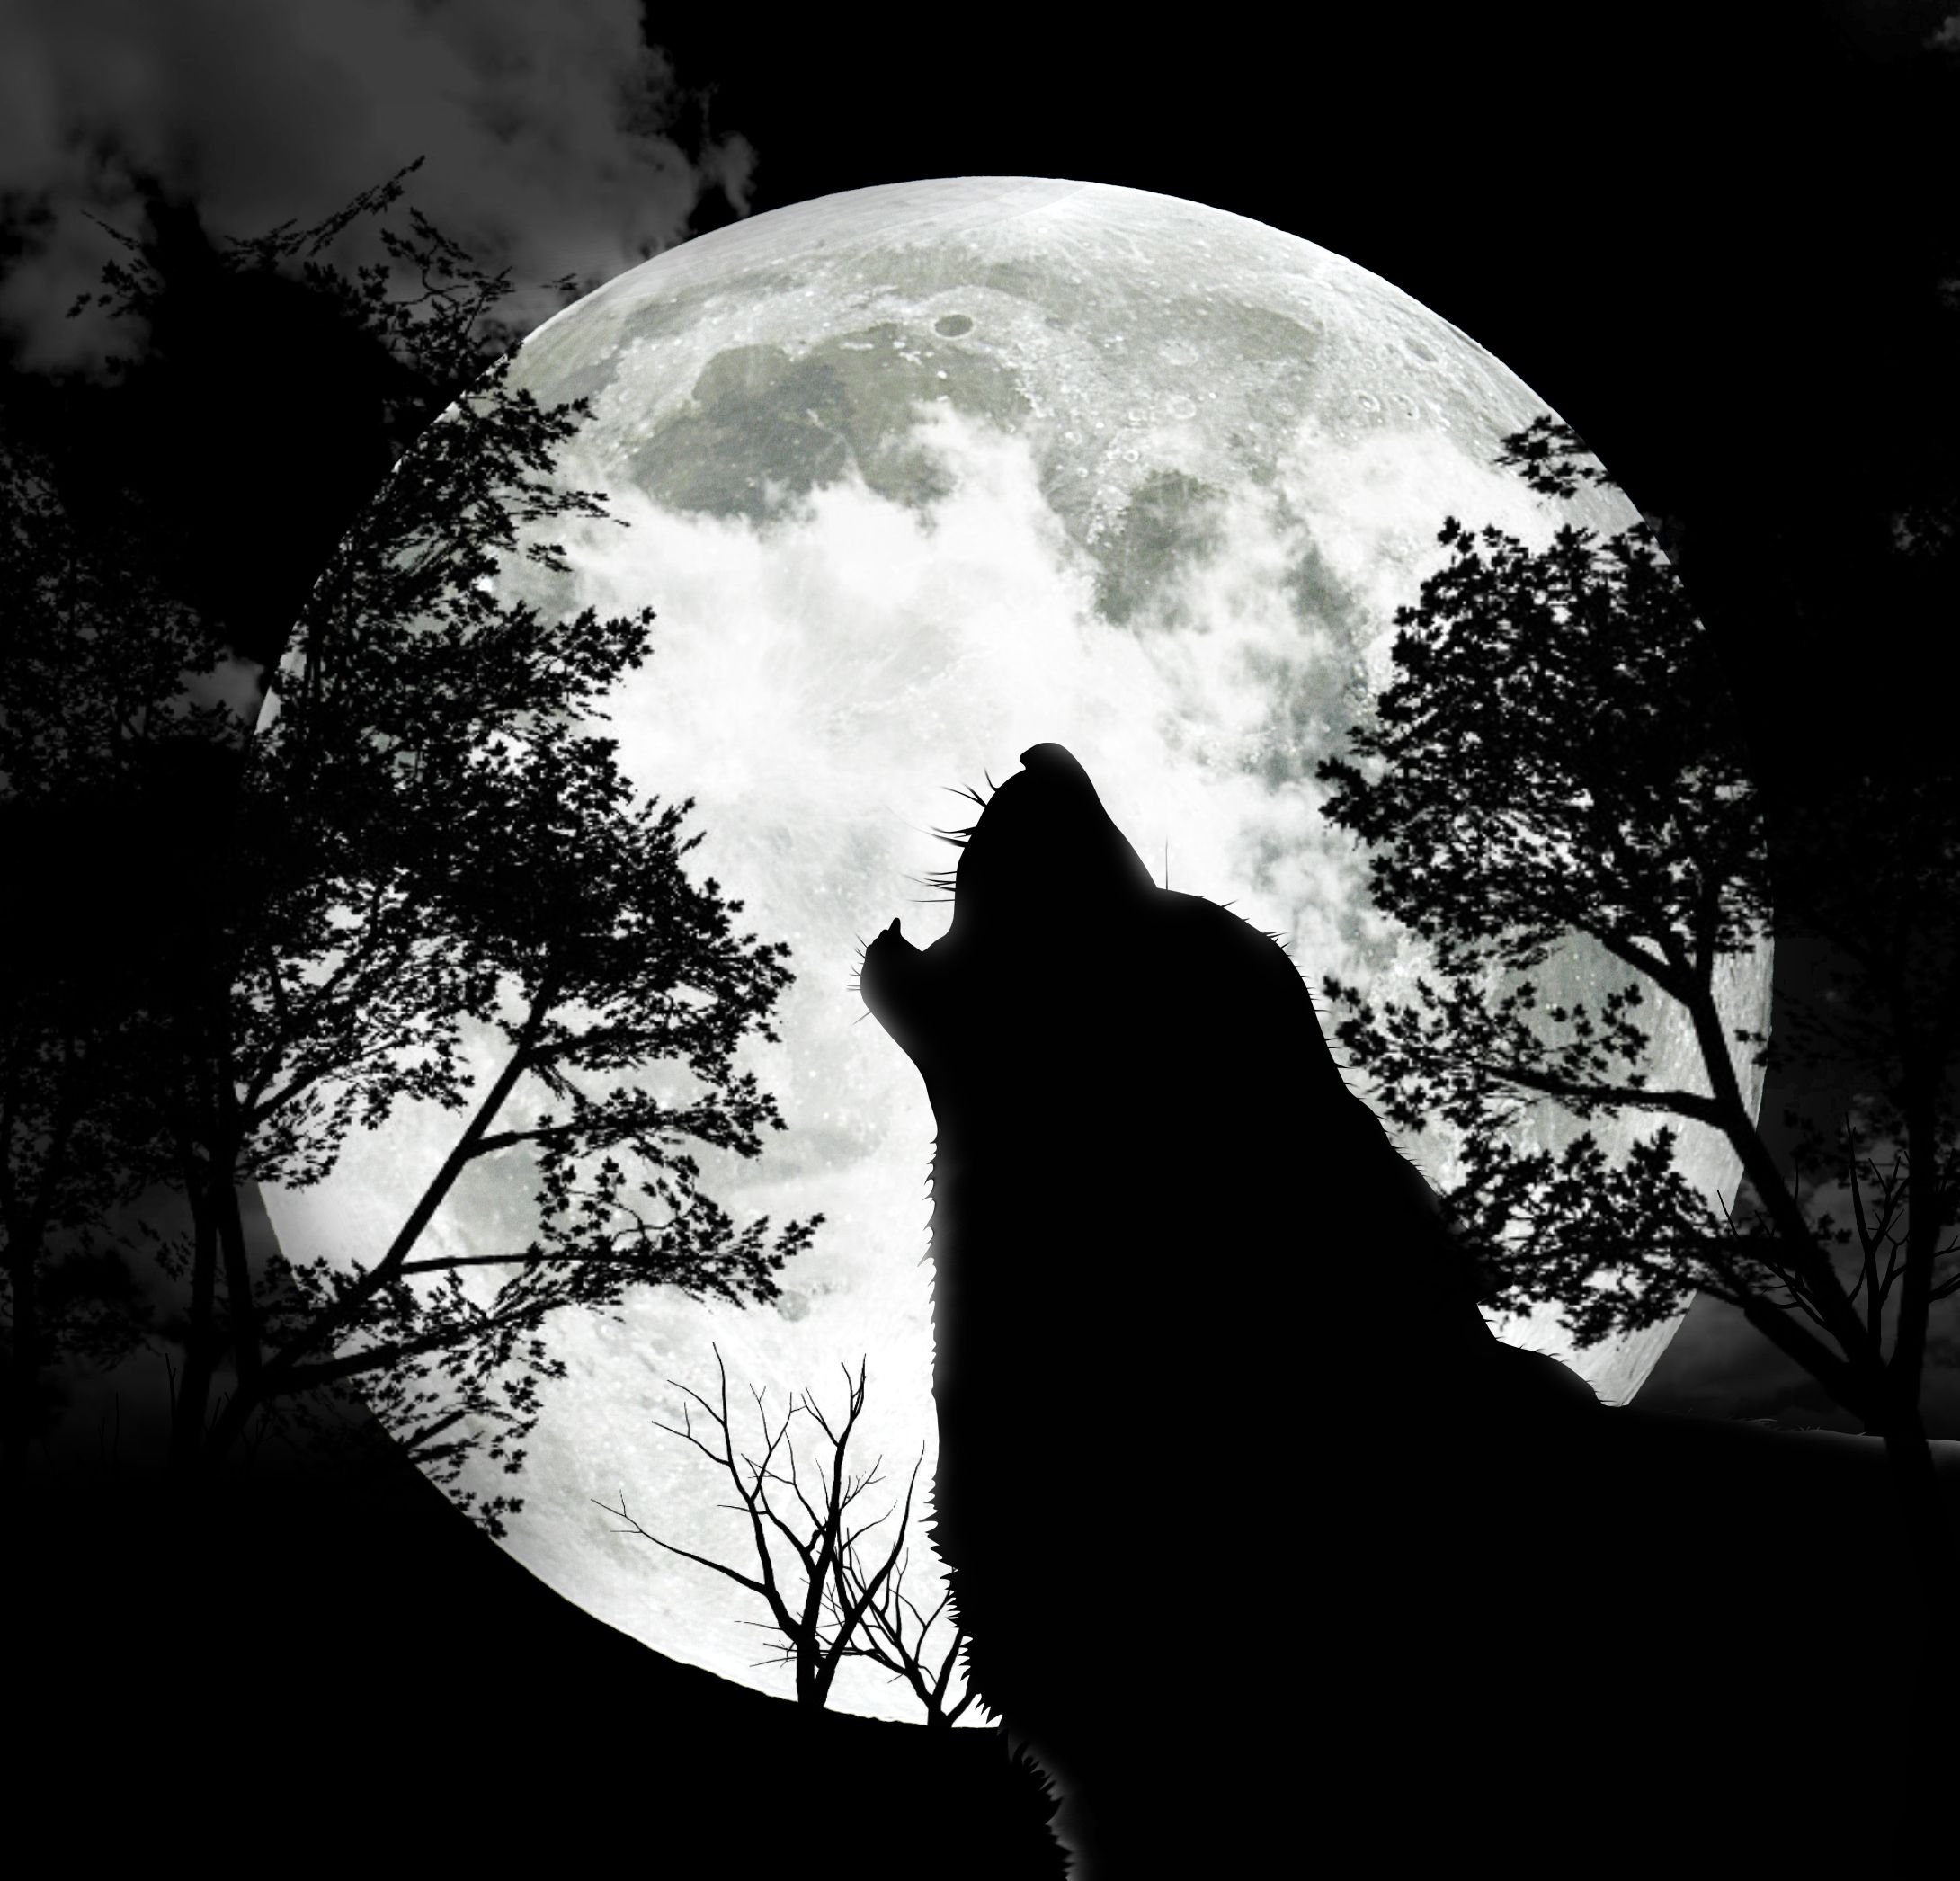 animals moon wolves 2180x2092 wallpaper High Quality Wallpaper, High Definition Wallpaper